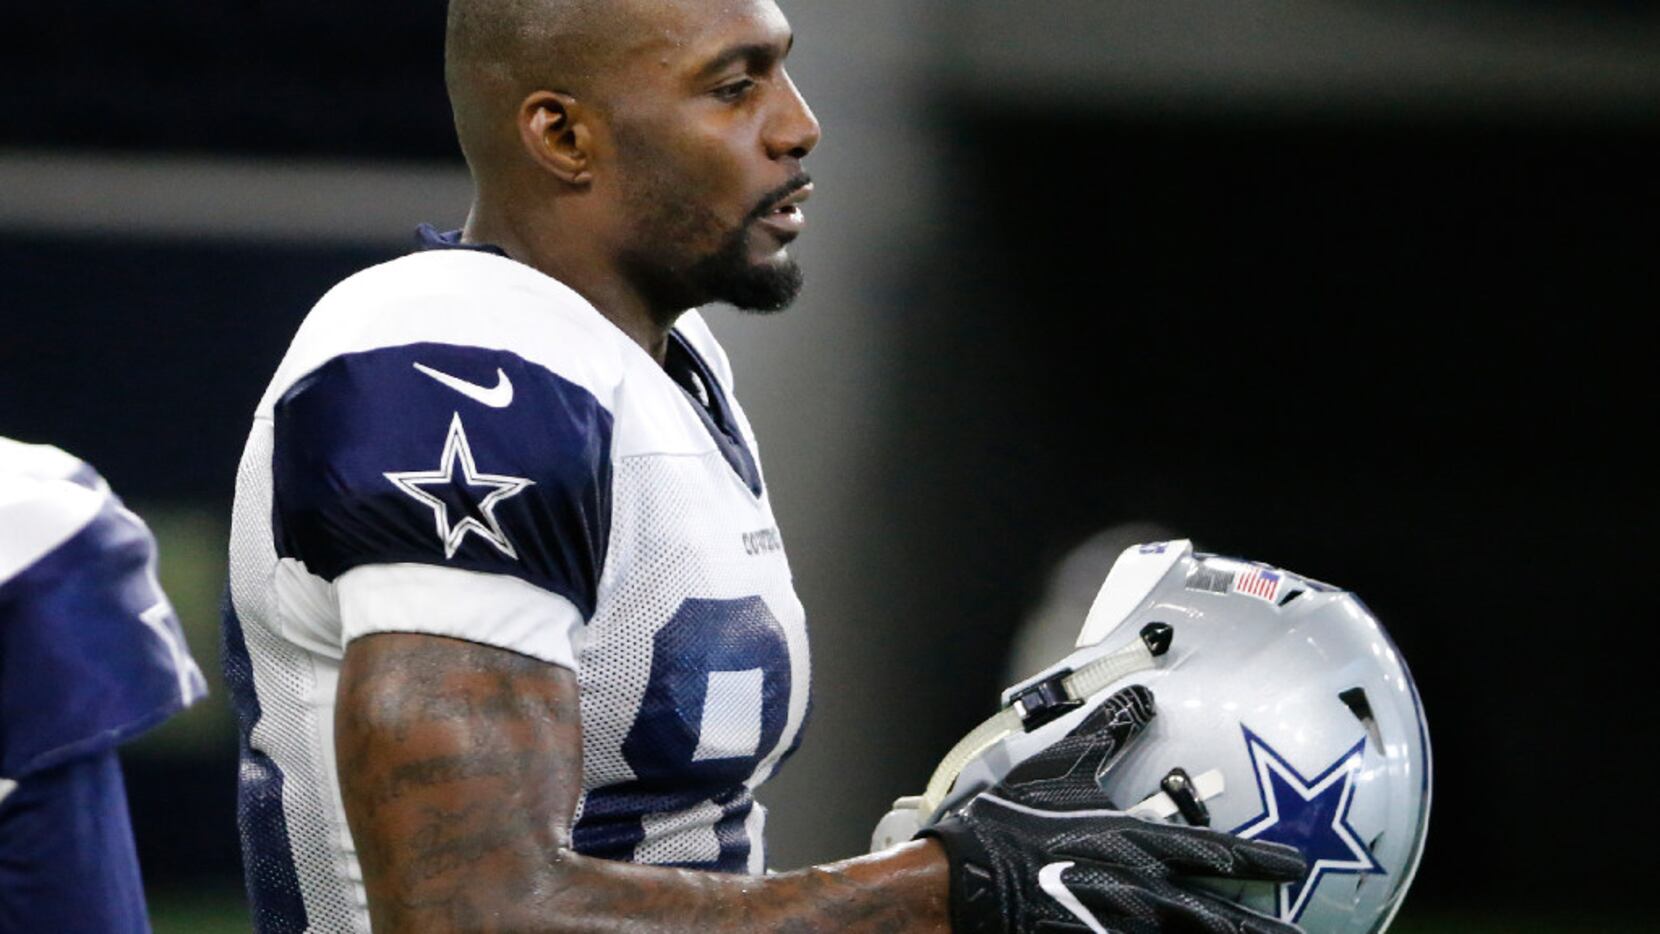 Cowboys' Dez Bryant: My childhood was rough, but I'm taking action